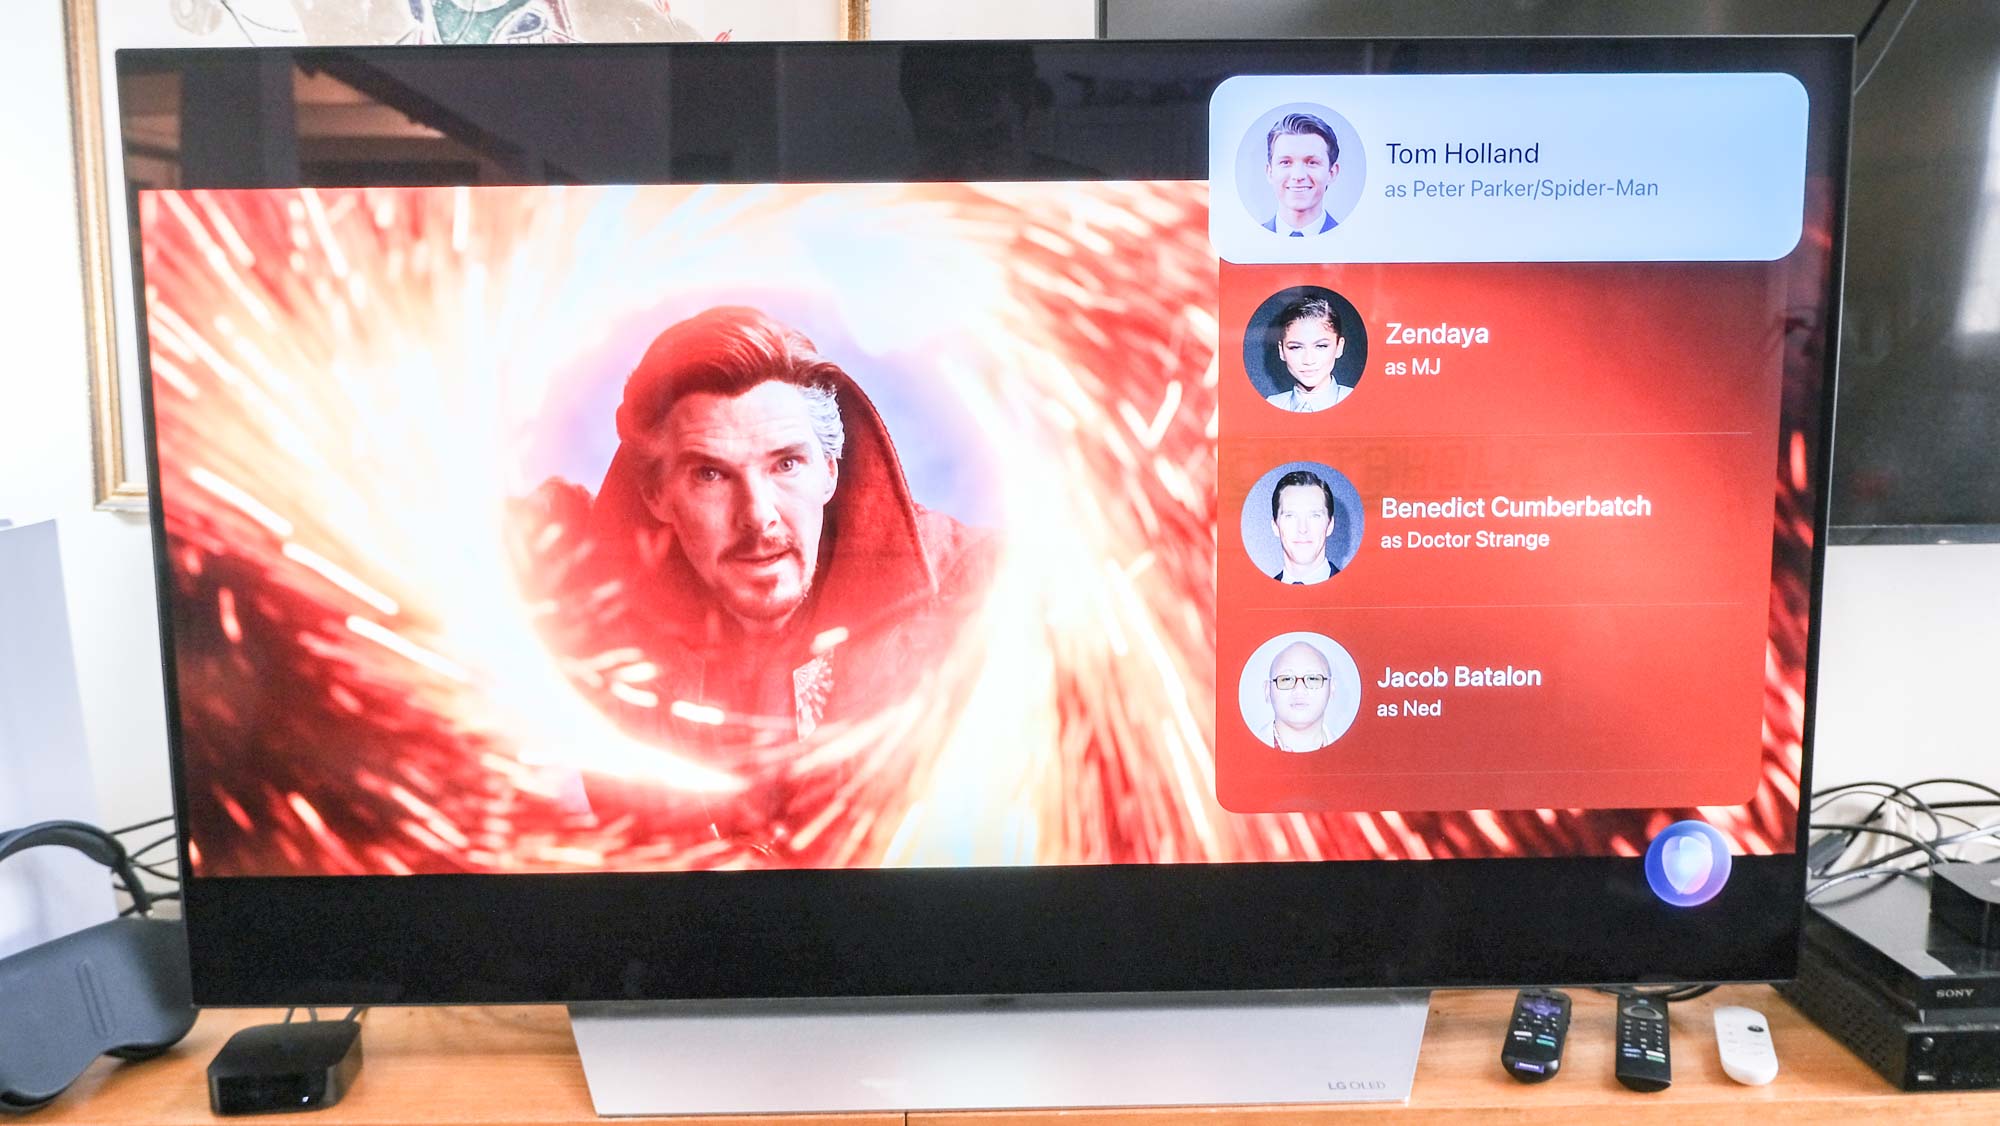 Benedict Cumberbatch as Doctor Strange in Spider-Man: No Way Home, appears next to a cast list on a TV connected to the Apple TV 4K (2022)